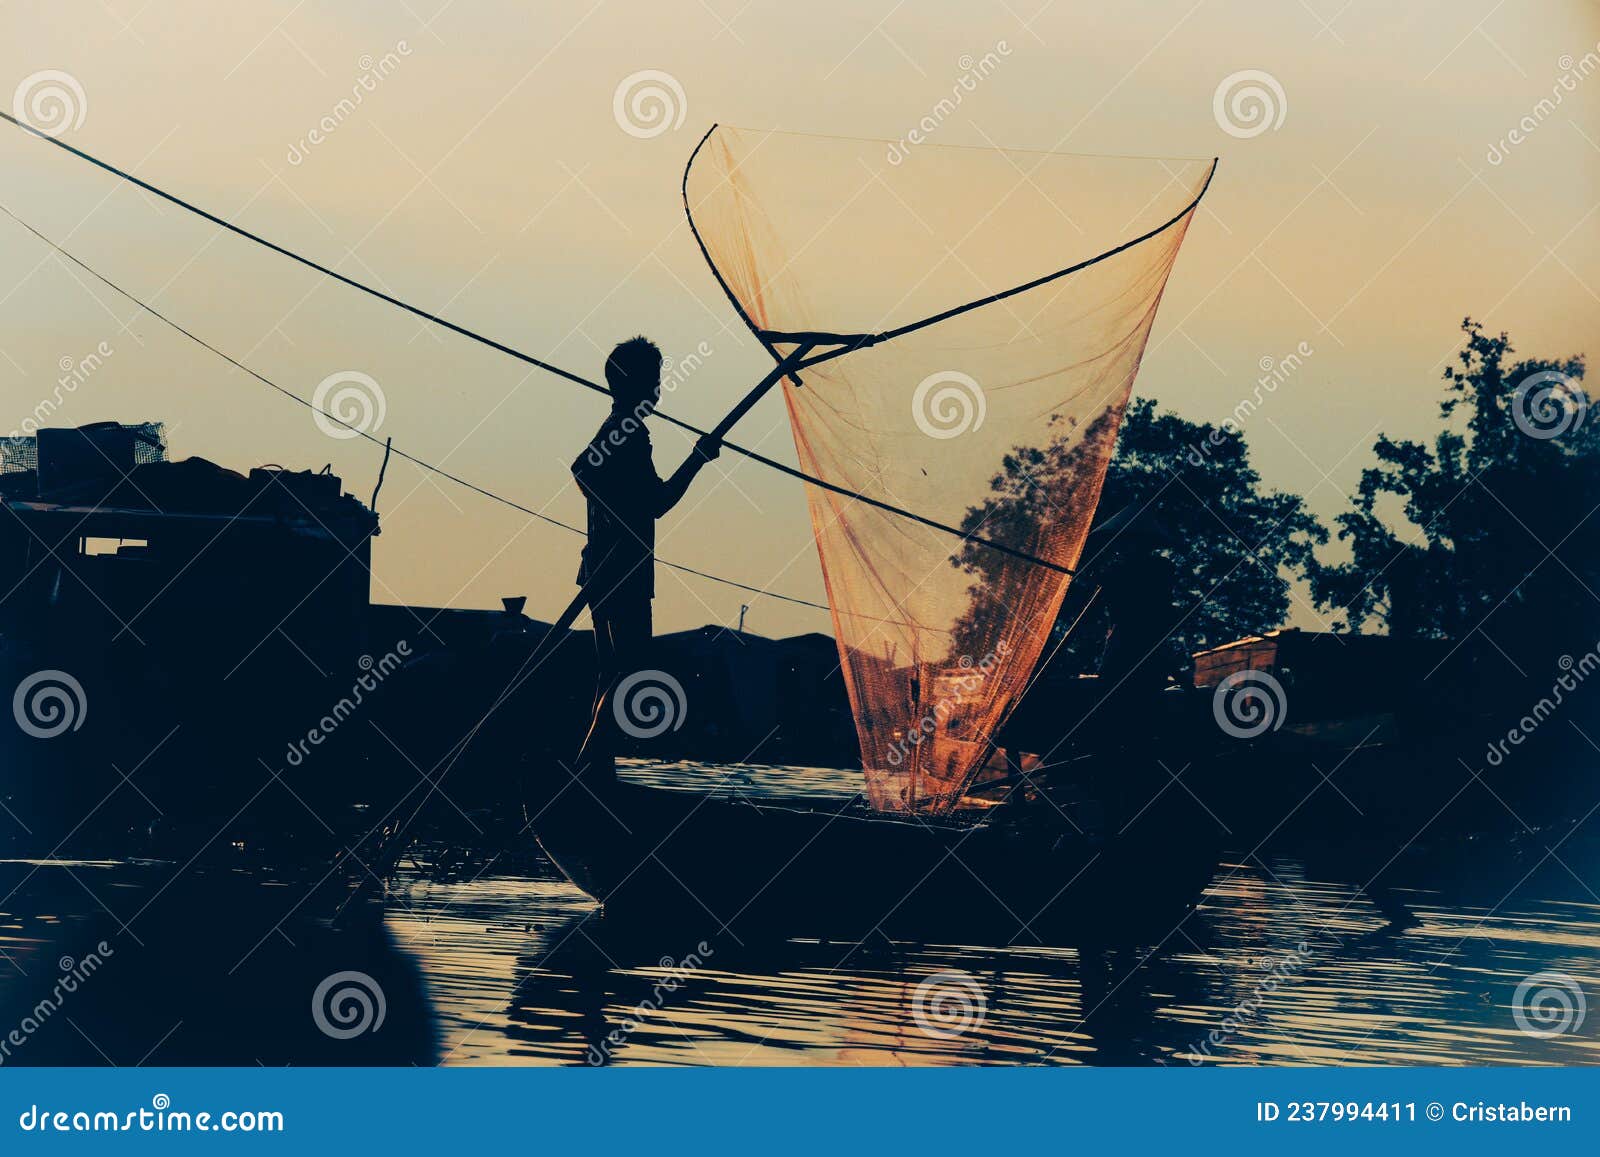 Silhouette of a Fisherman Casting a Fishing Net Stock Image